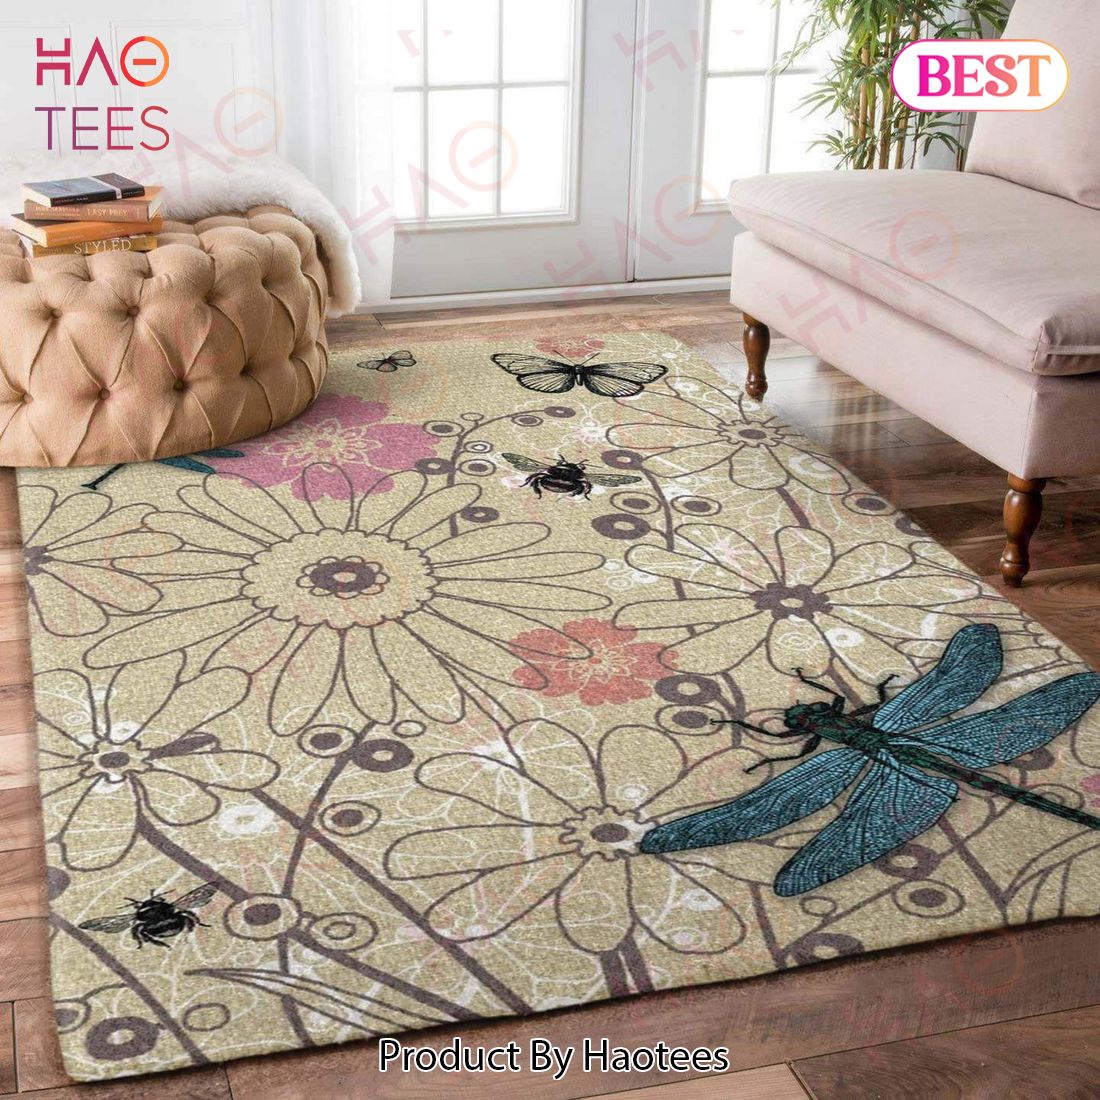 Dragonfly Limited Edition Area Rugs Carpet Mat Kitchen Rugs Floor Decor – PR31